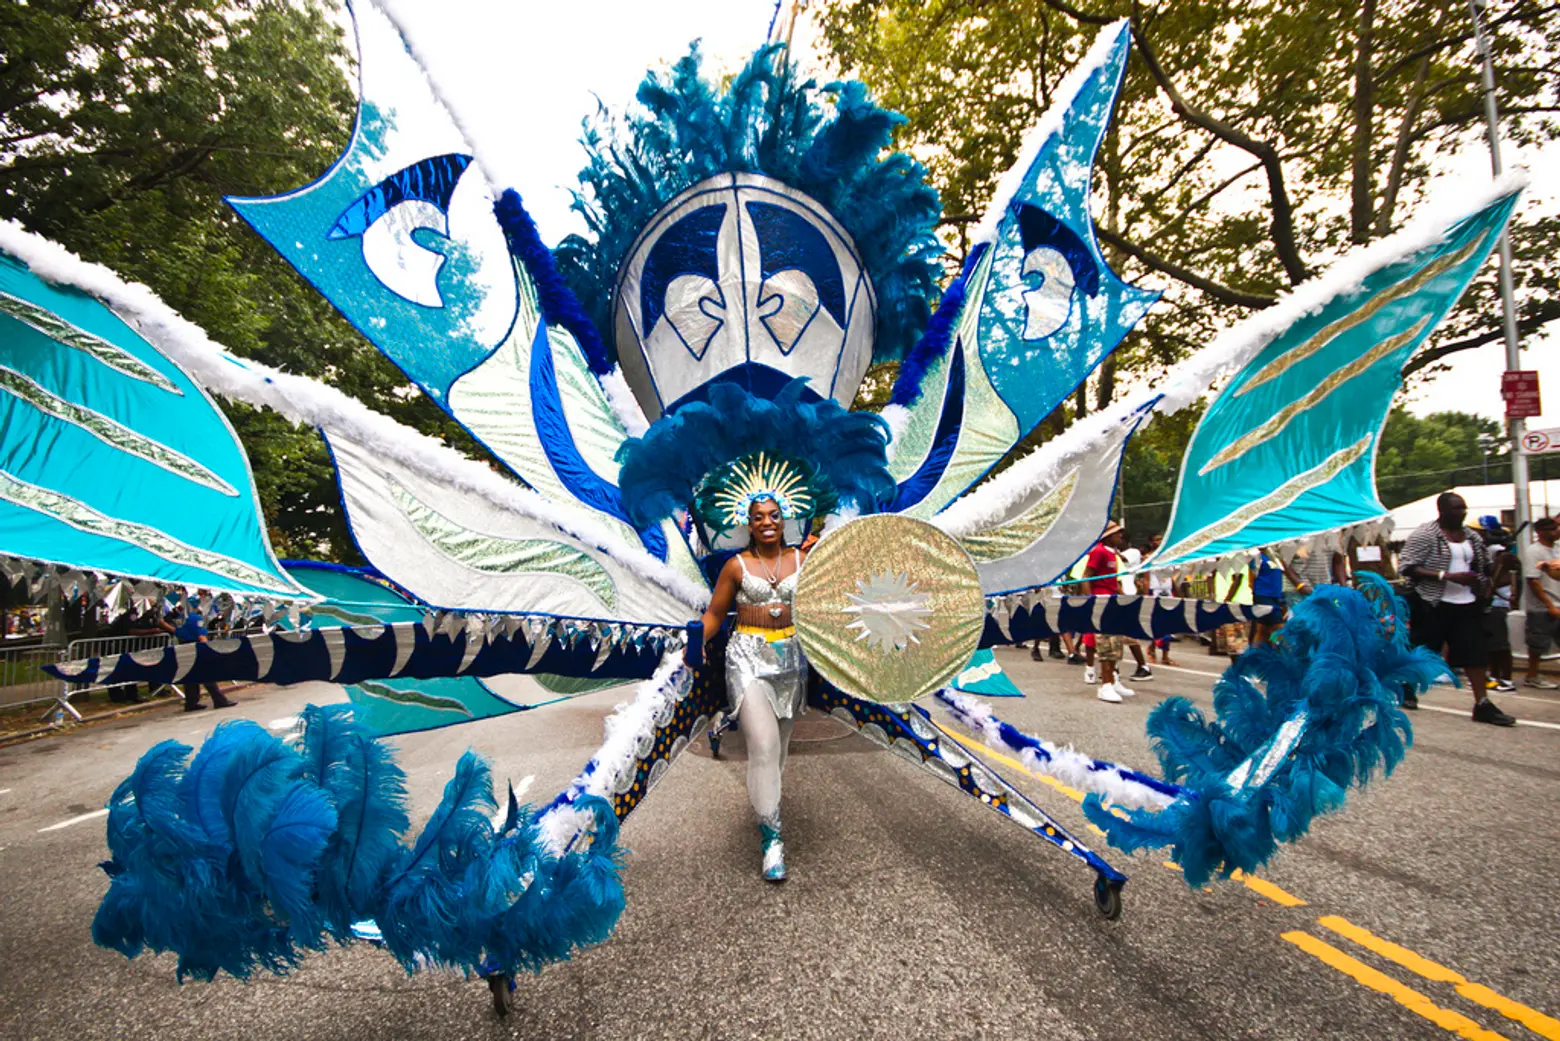 The Secrets To Designing Spectacular Caribbean Carnival Costumes